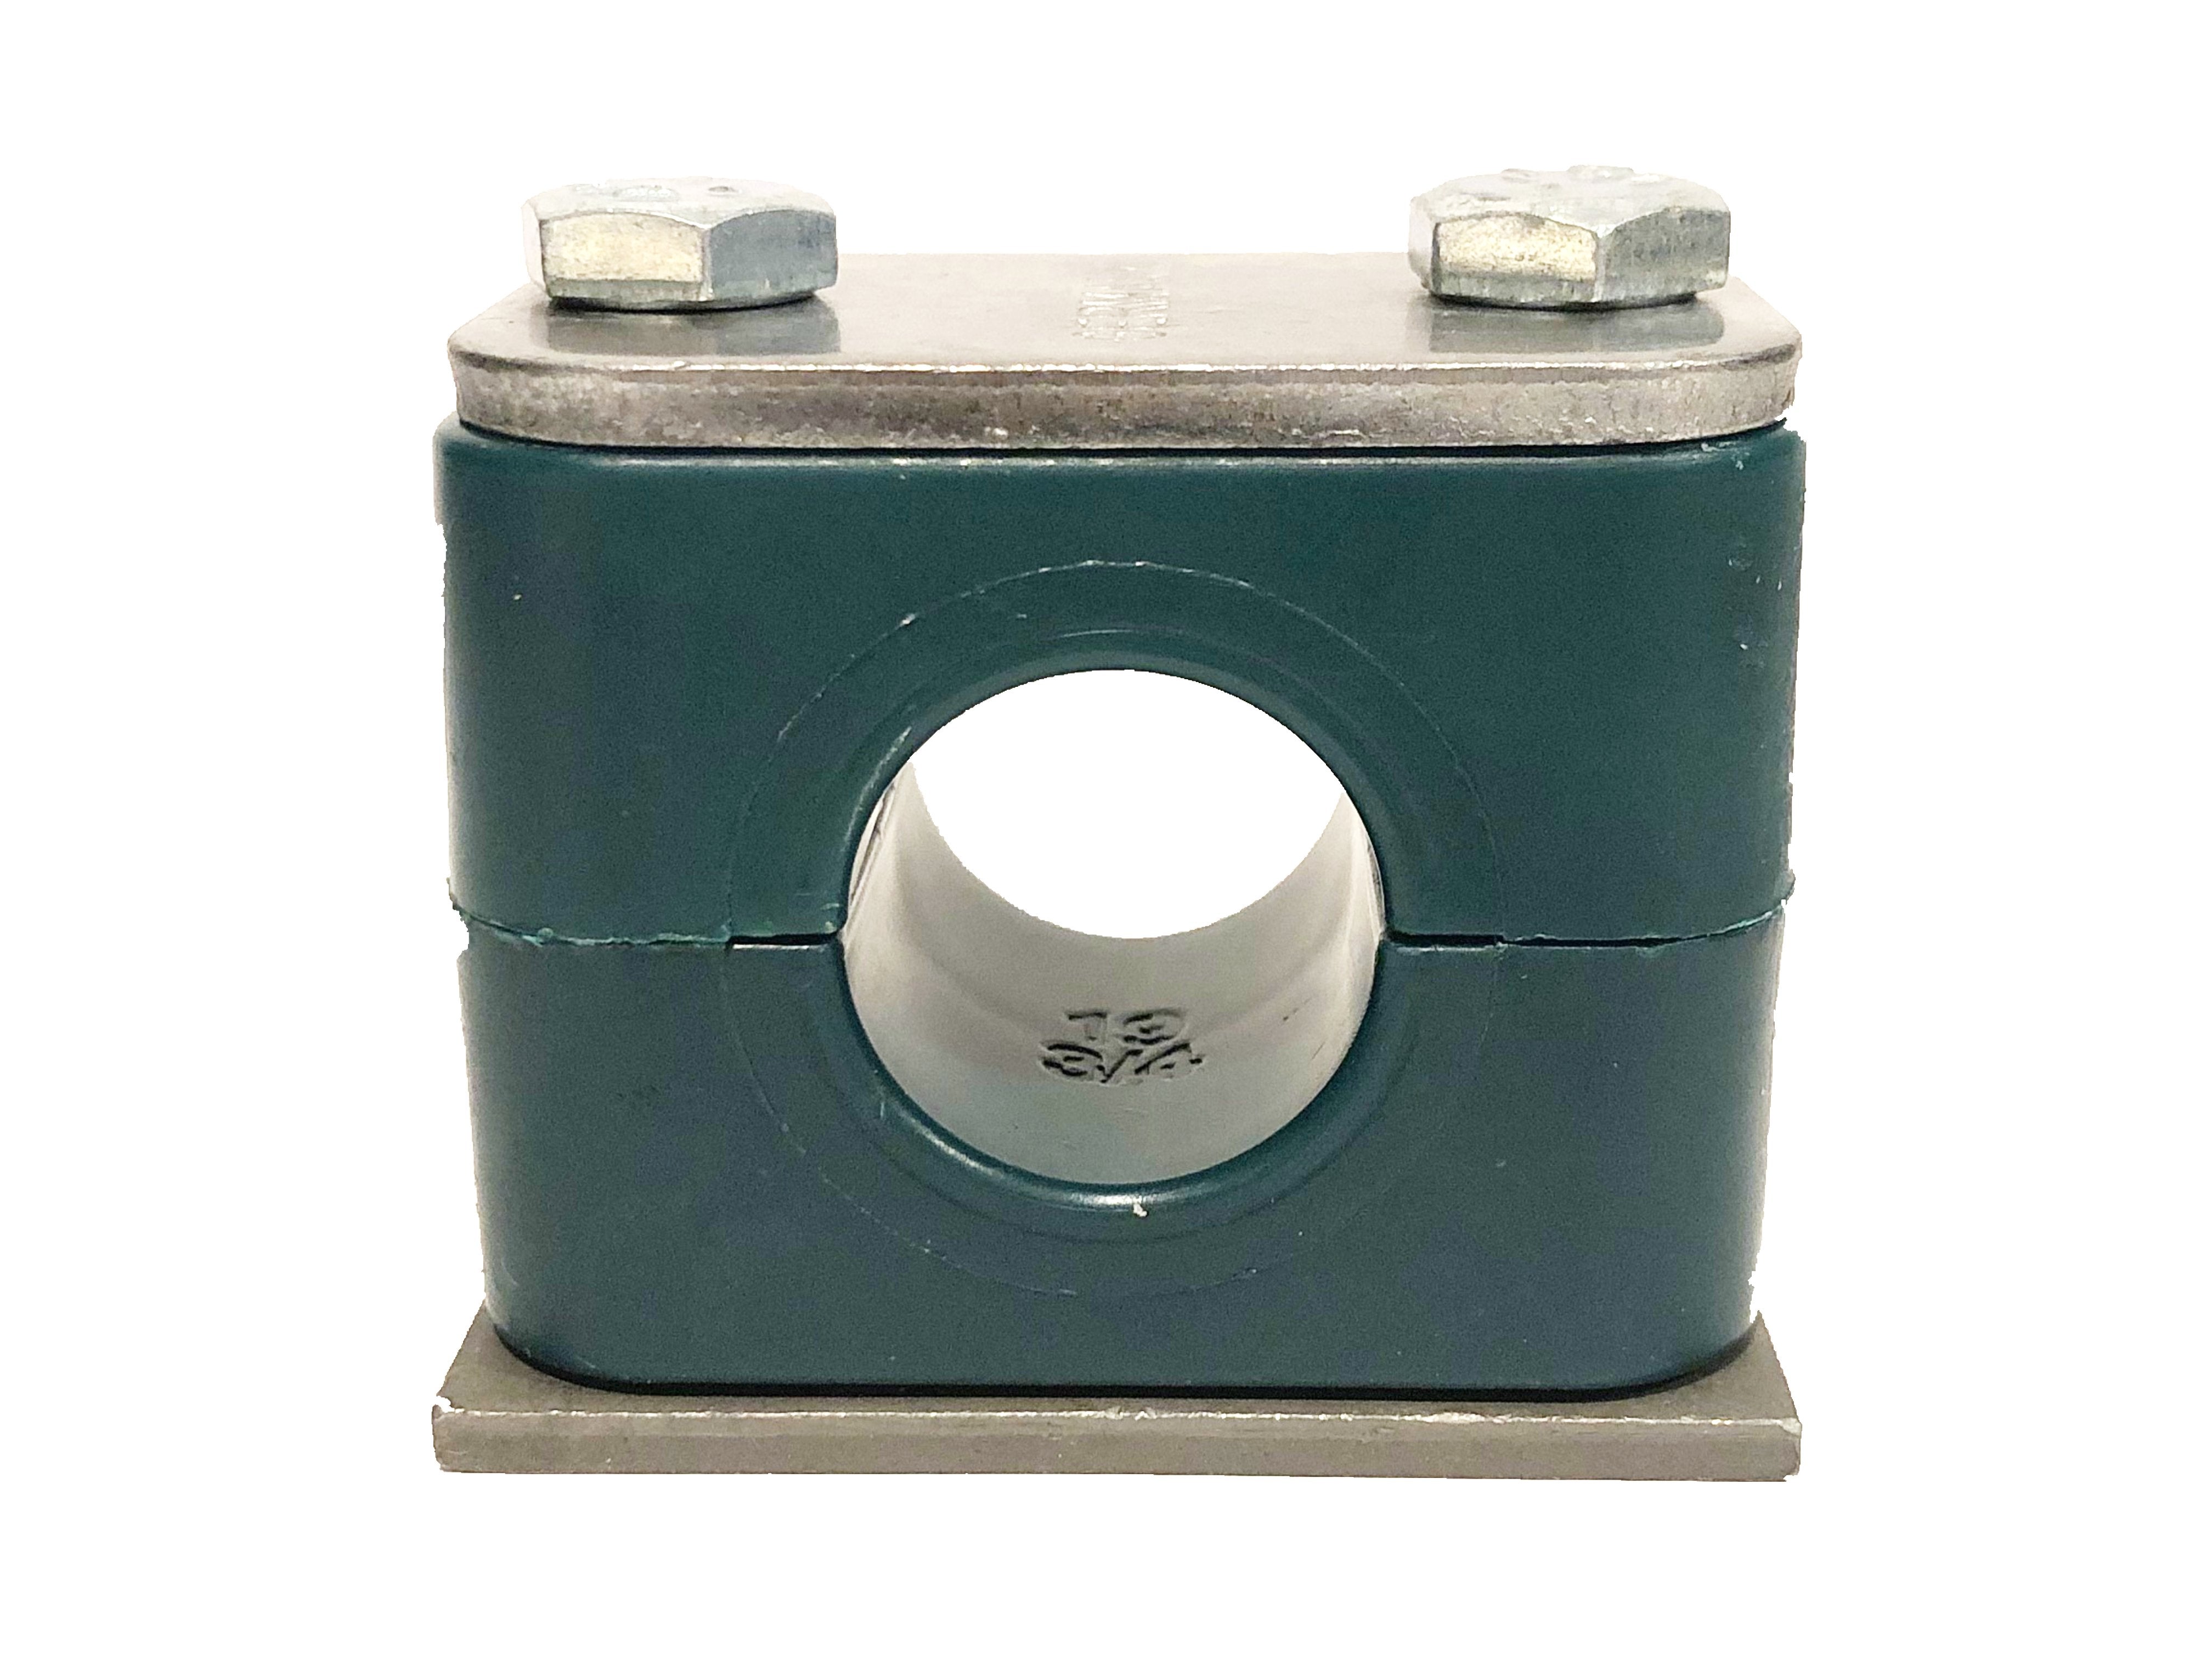 SP-542-PP-H-DP-AS-U-W10 : Stauff Clamp, Single Weld Plate, 1.65" (42mm) OD, for 1.25" Pipe, Green PP Insert, Smooth Interior, Carbon Steel